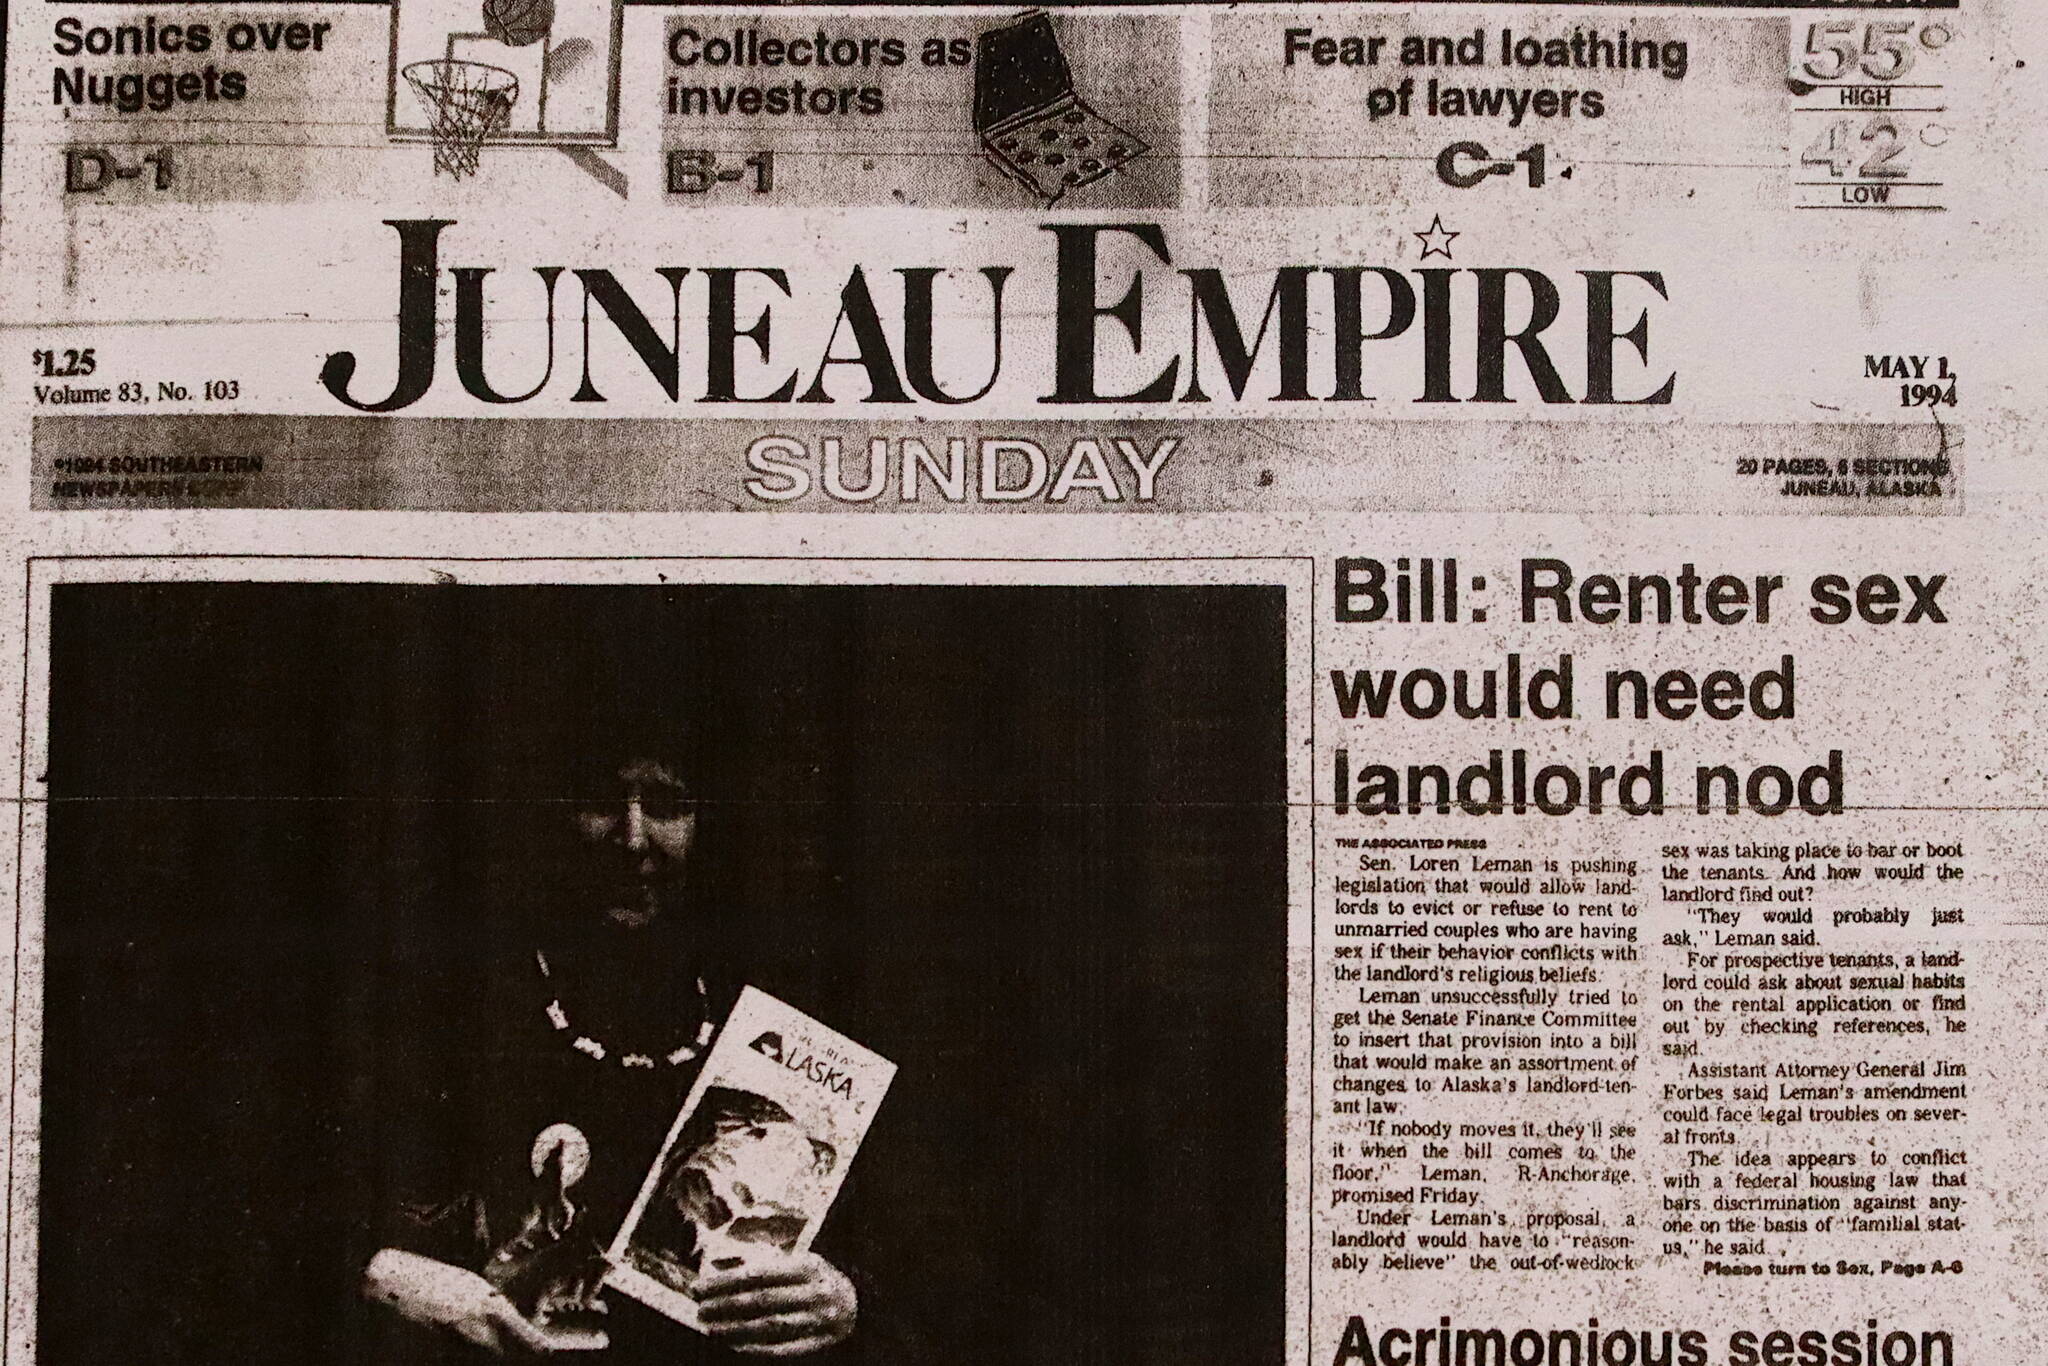 The front page of the Juneau Empire on May 1, 1994. (Mark Sabbatini / Juneau Empire)